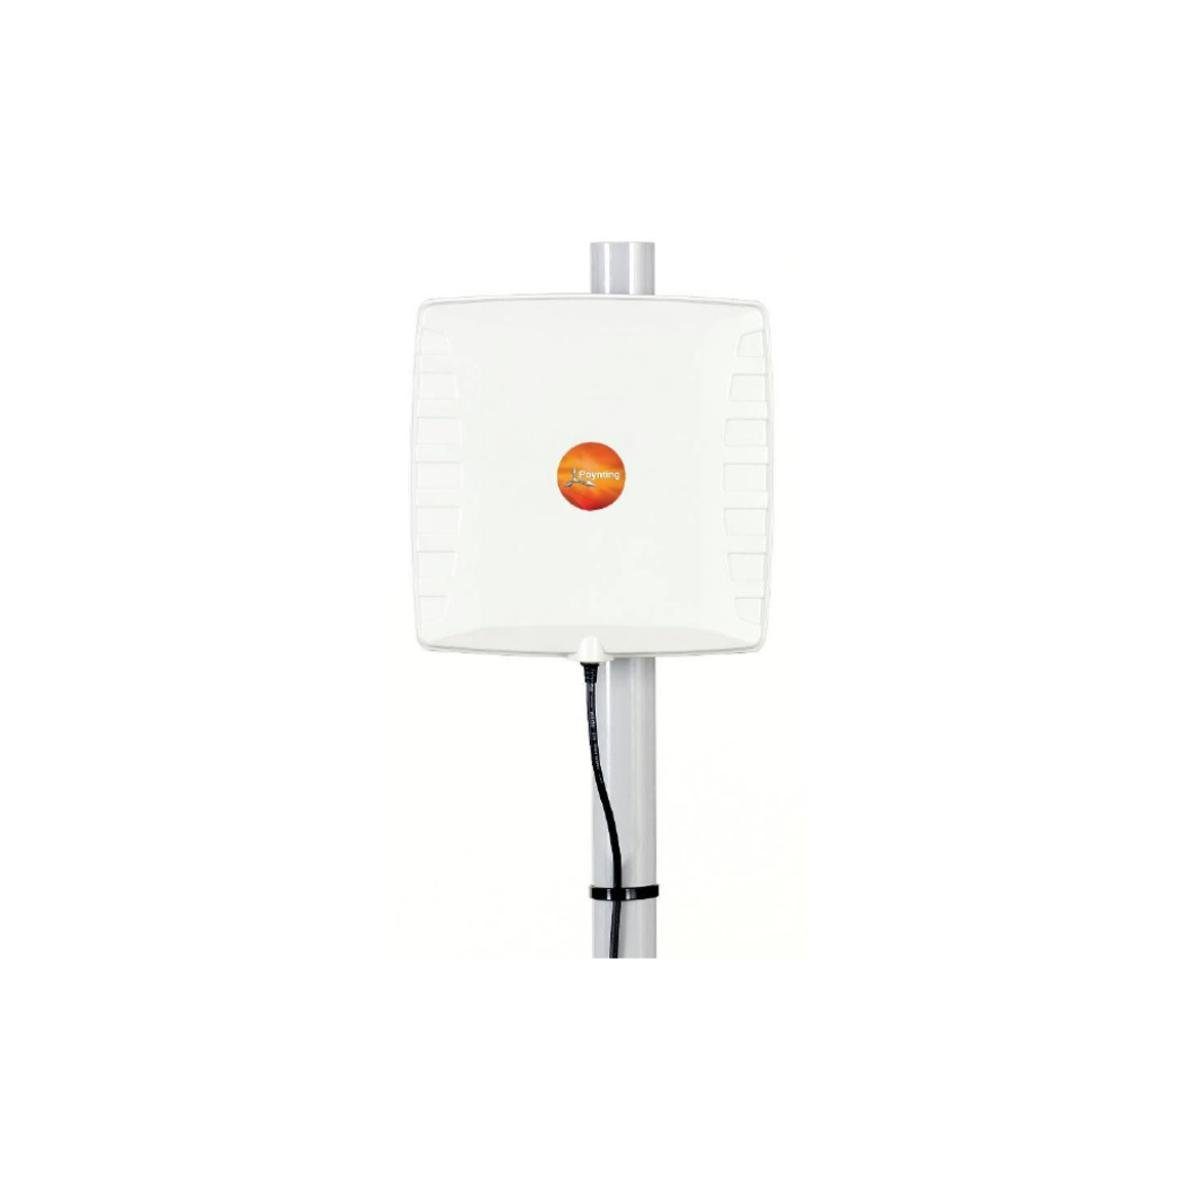 Poynting A-PATCH-0026 - PATCH-26 Lineare RFID Patch-Antenne, 860... WLAN-Antenne